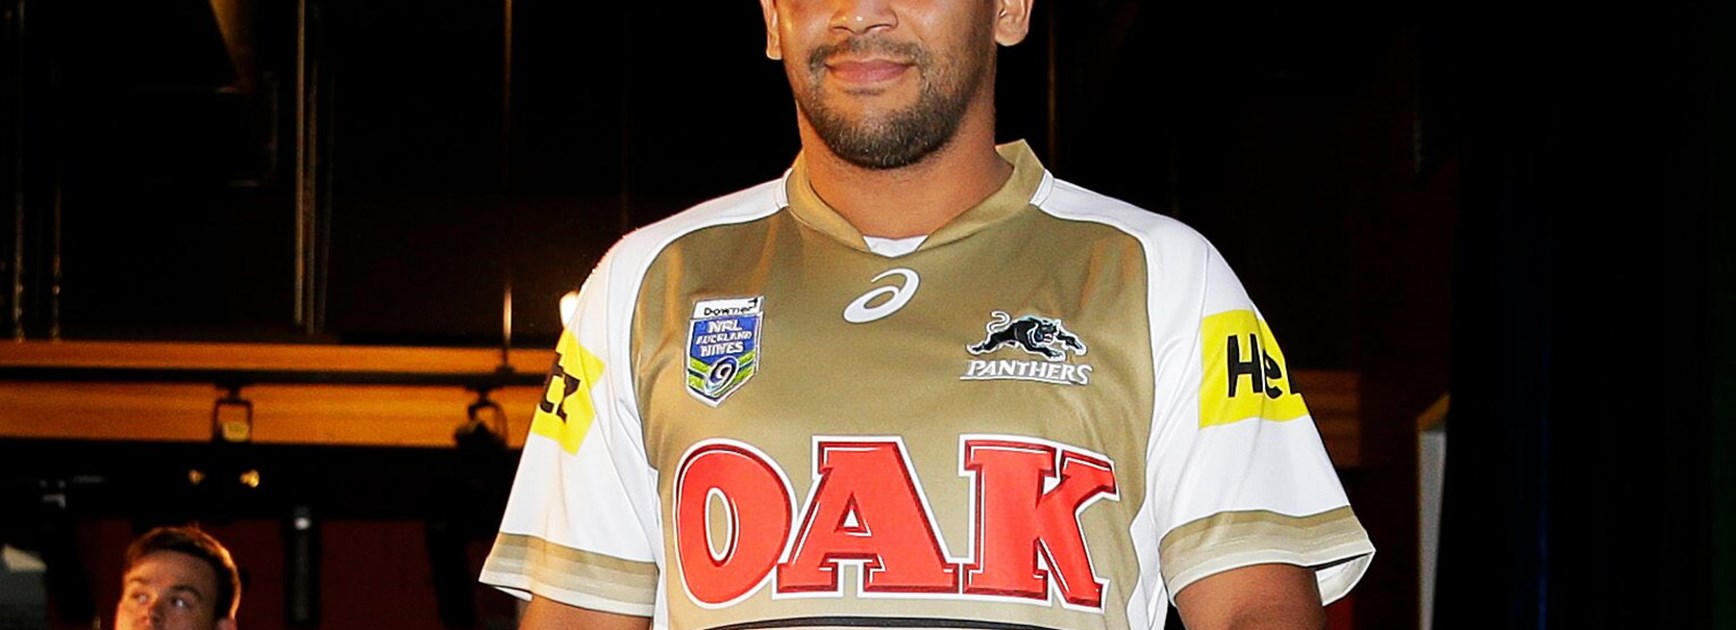 Tyrone Peachey at the 2017 Downer NRL Auckland Nines jersey launch.